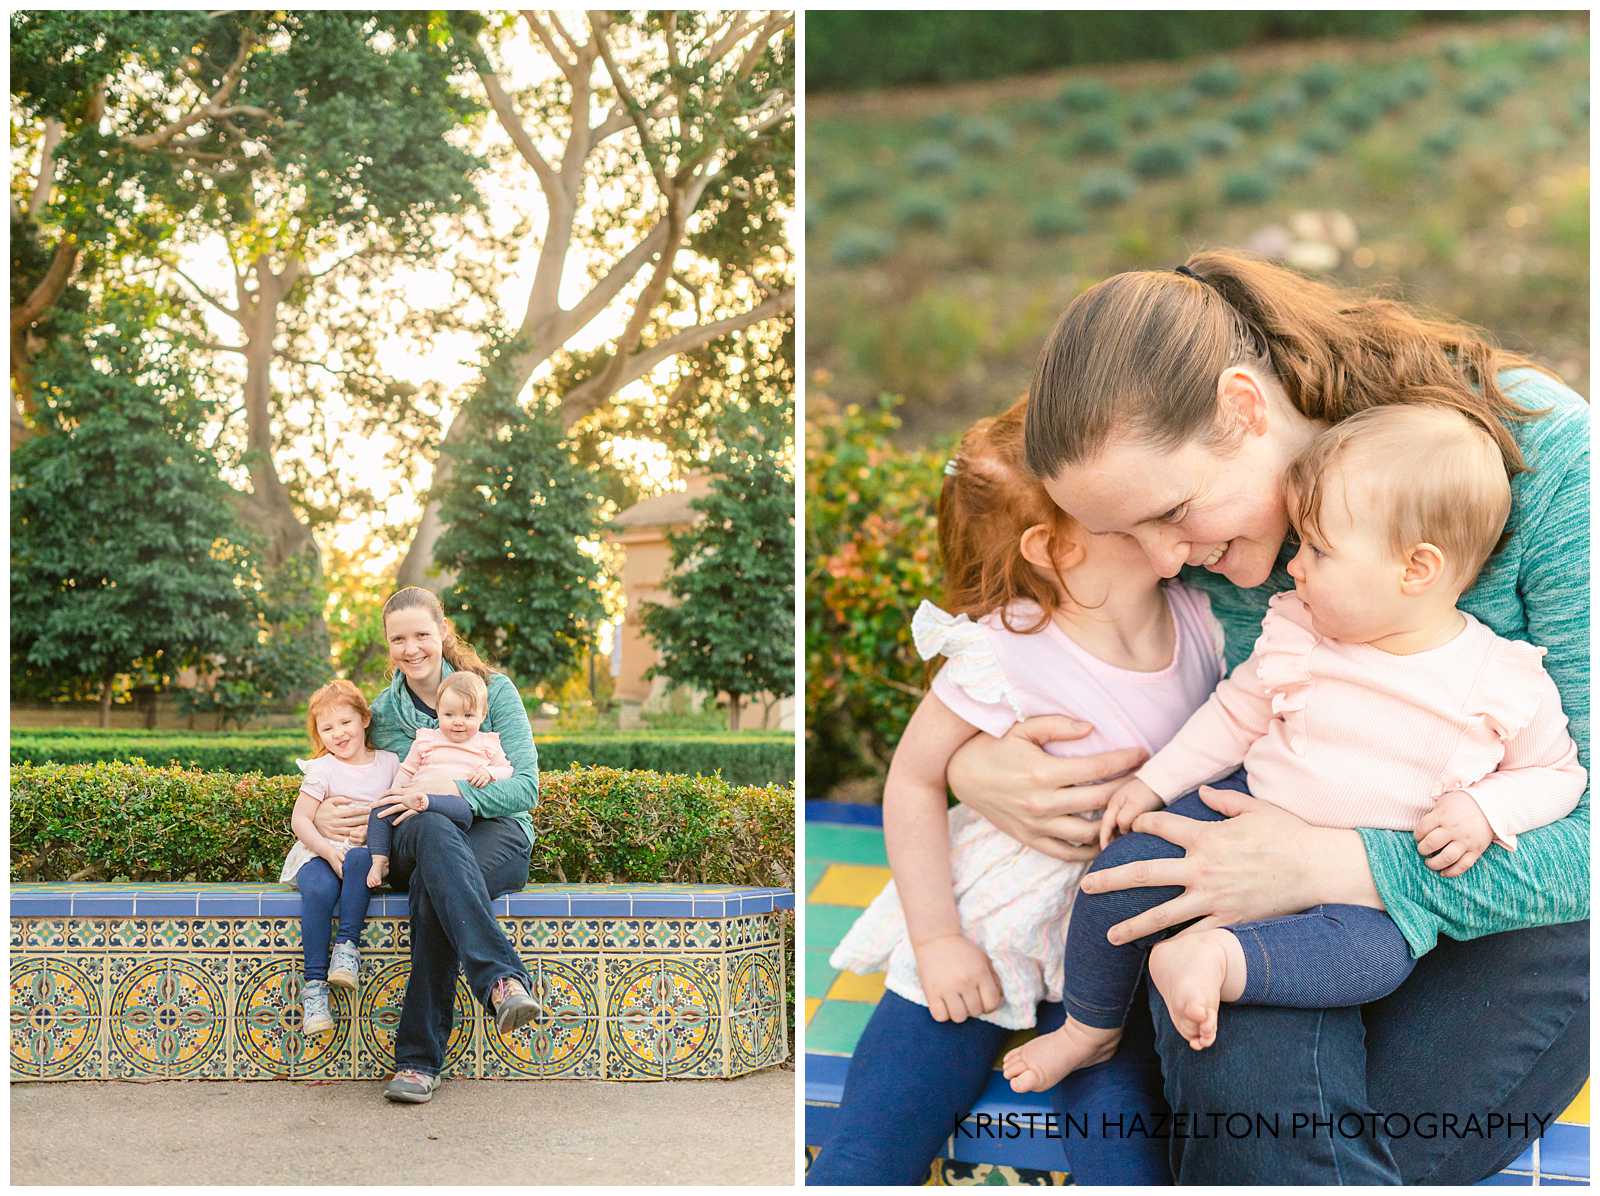 Mom with two young daughters in Balboa Park family photos by photographer Kristen Hazelton